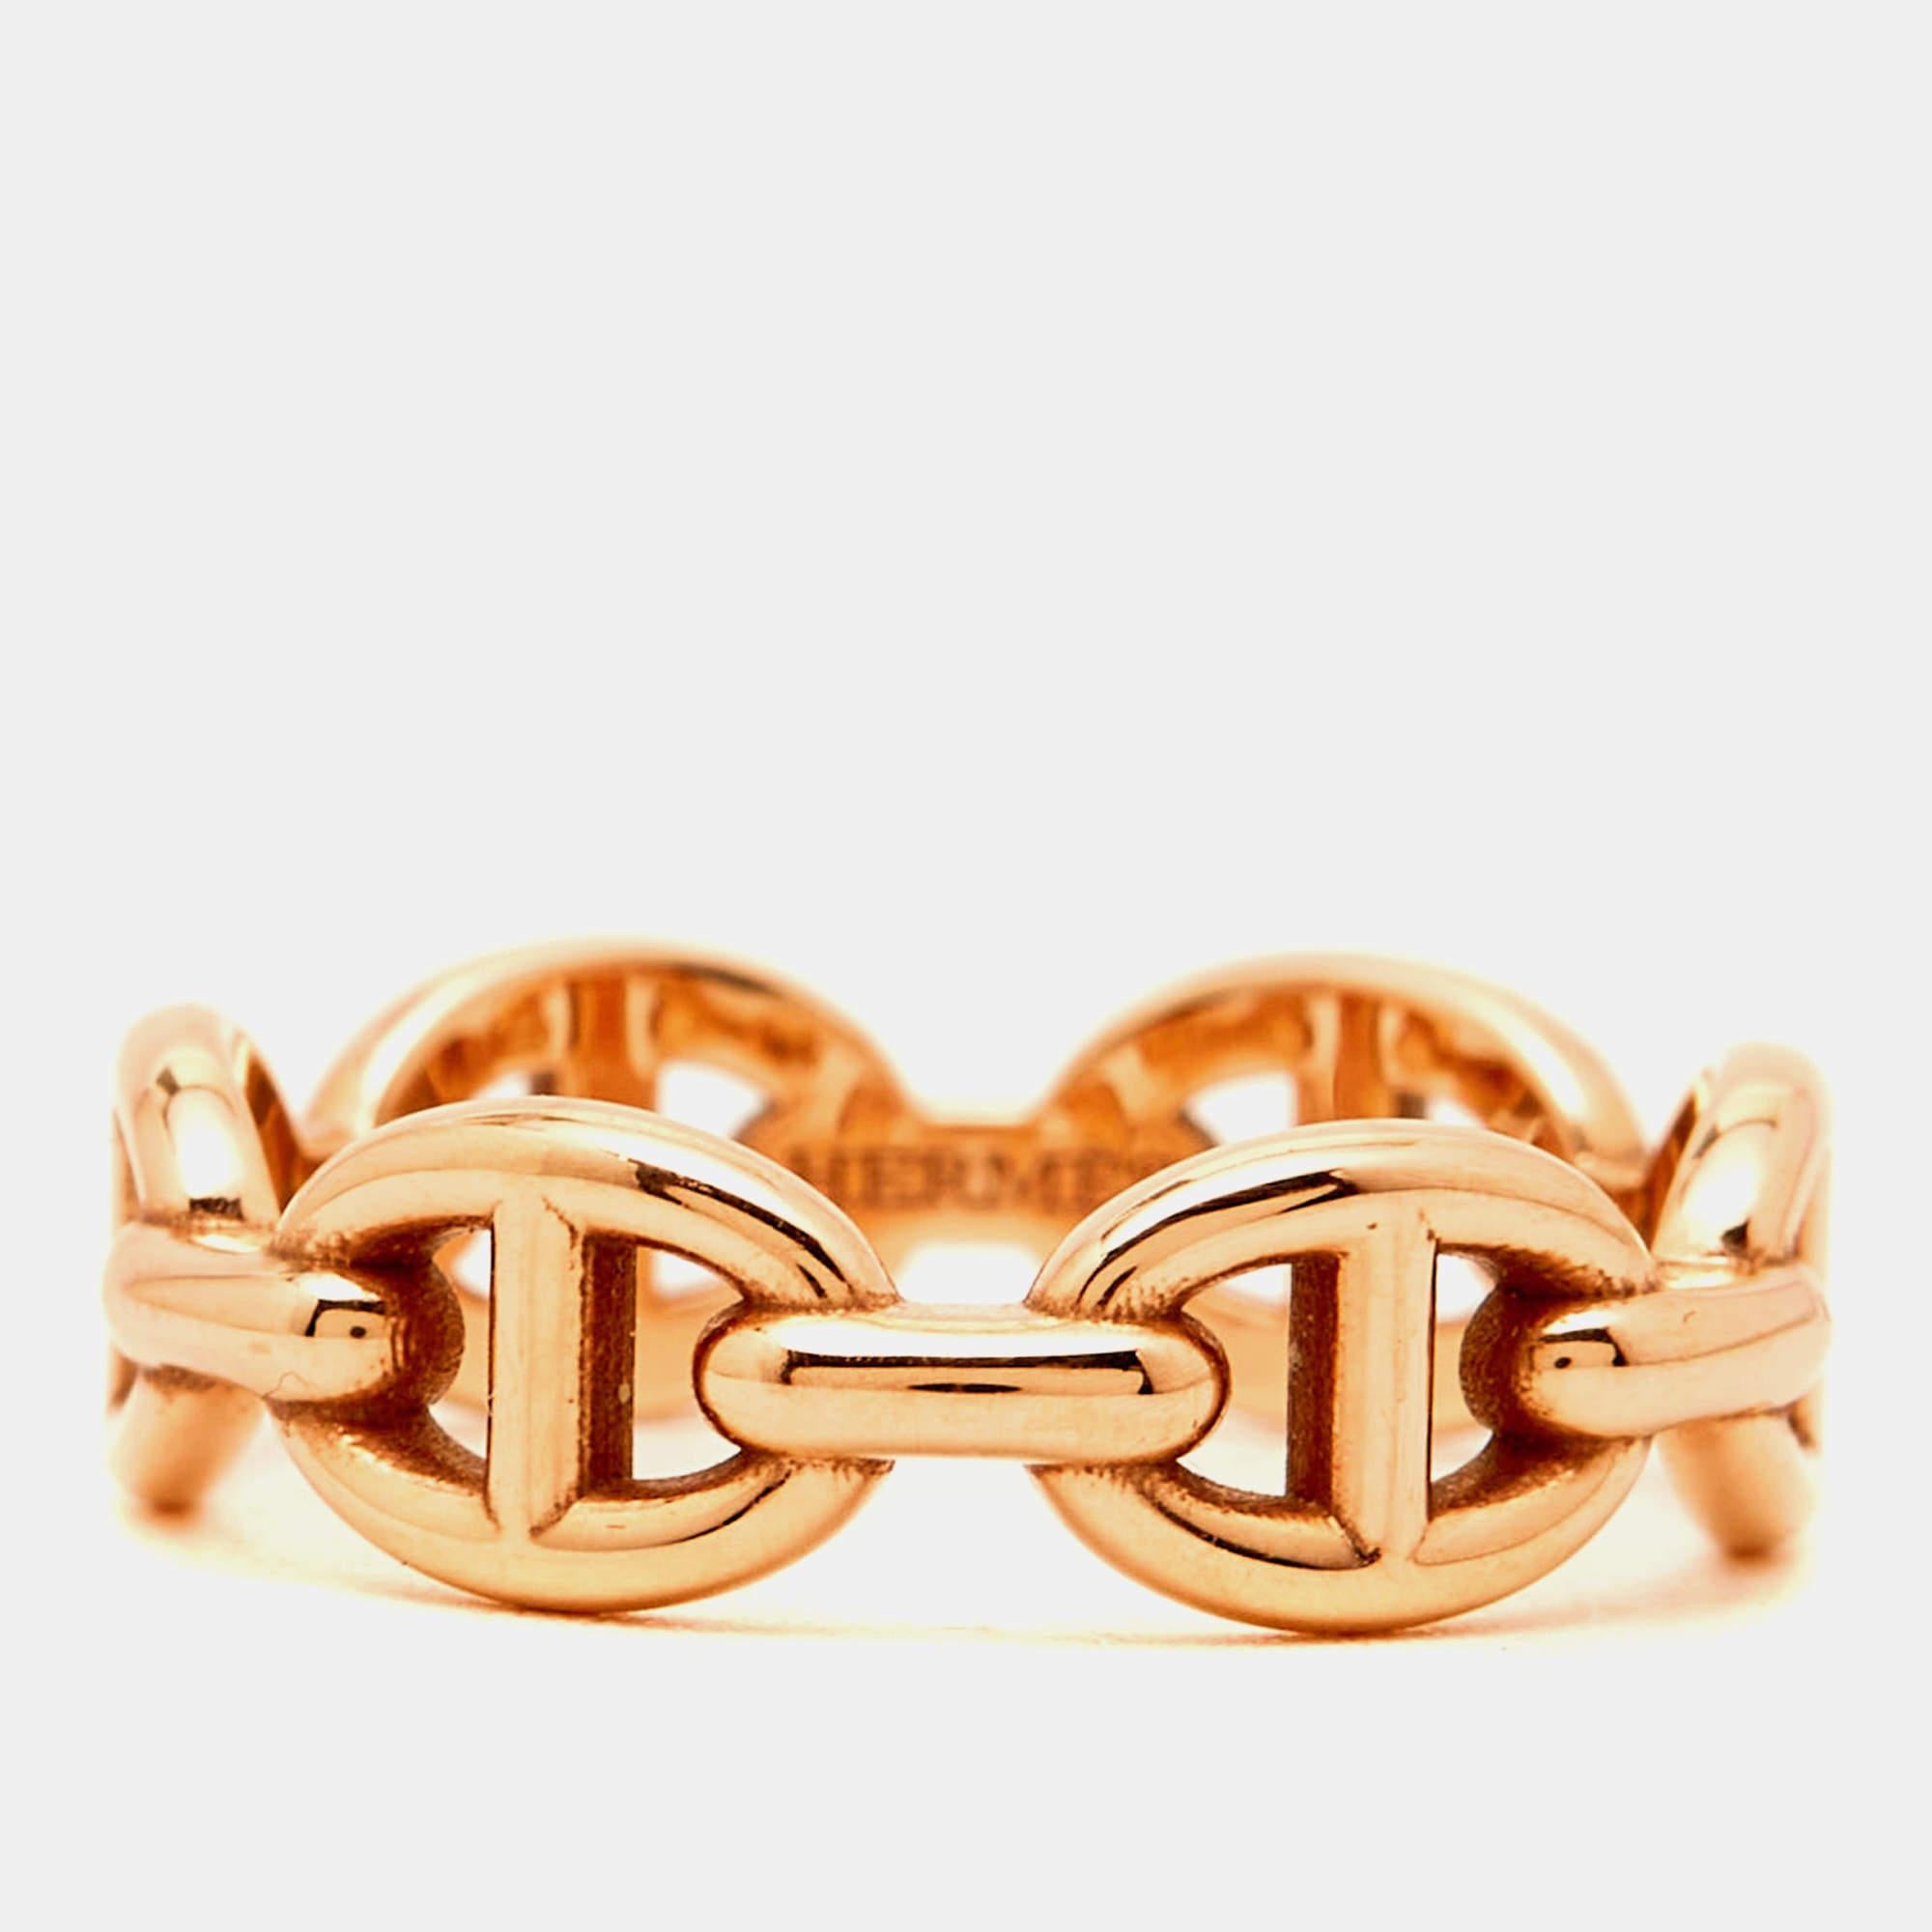 The Hermès Chaine d'Ancre Enchainee ring is an exquisite piece of jewelry. Crafted in lustrous rose gold, it features the iconic Chaine d'Ancre chain-link motif, creating a chic and timeless design. This ring showcases the brand's commitment to